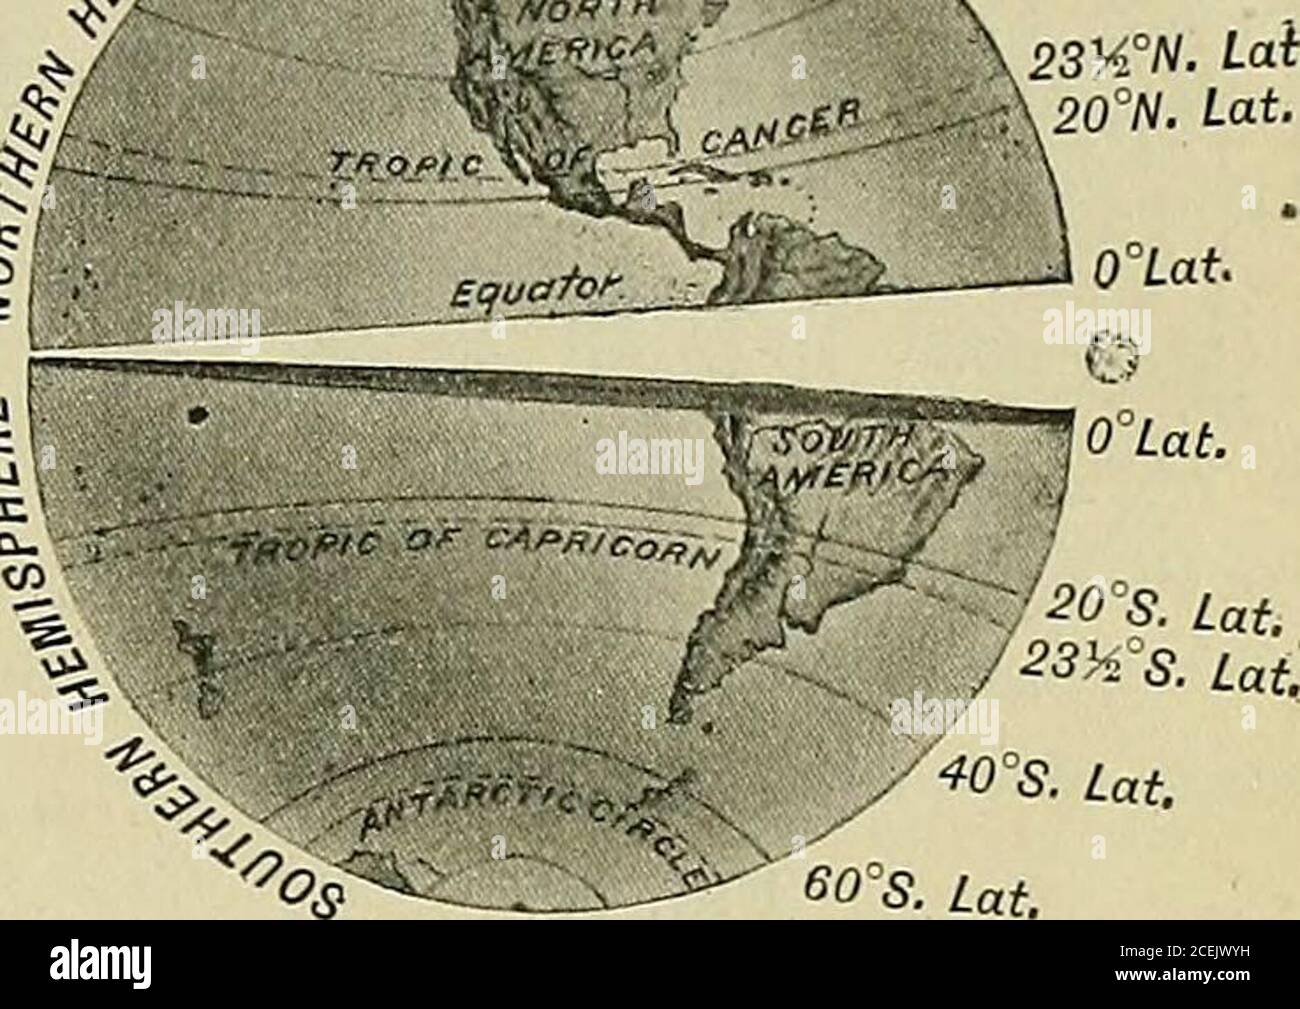 A Complete Geography Cesupon A Globe Are Located In Much This Manner For Example The Equator Which Extends Around The Earth Midway Between Thepoles Corresponds To The Dividing Street Running East And